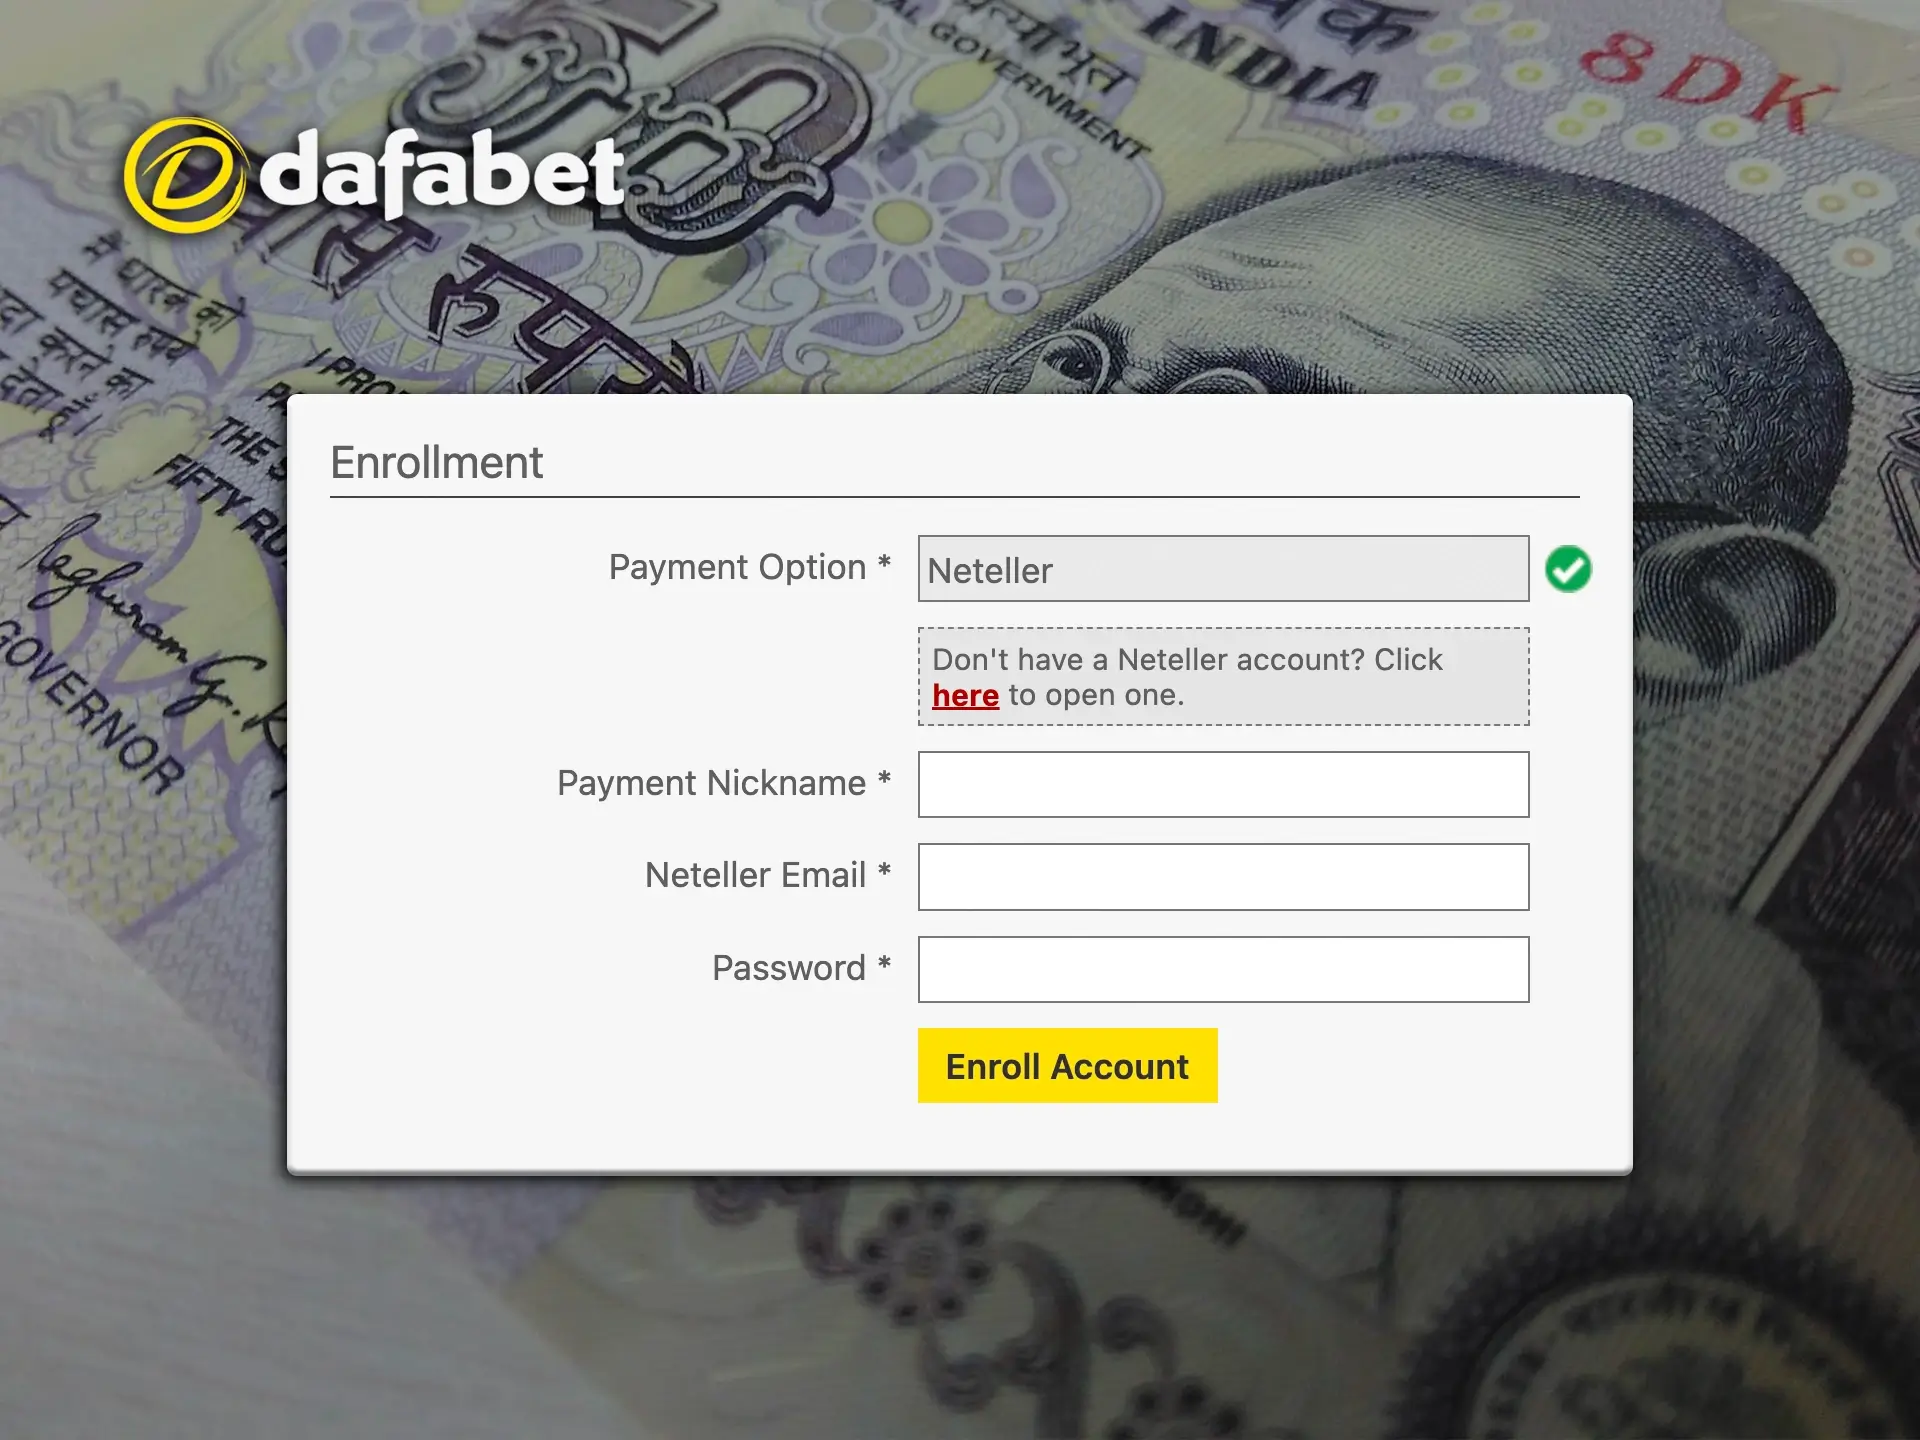 Dafabet offers its users quick and easy withdrawals by using Neteller.